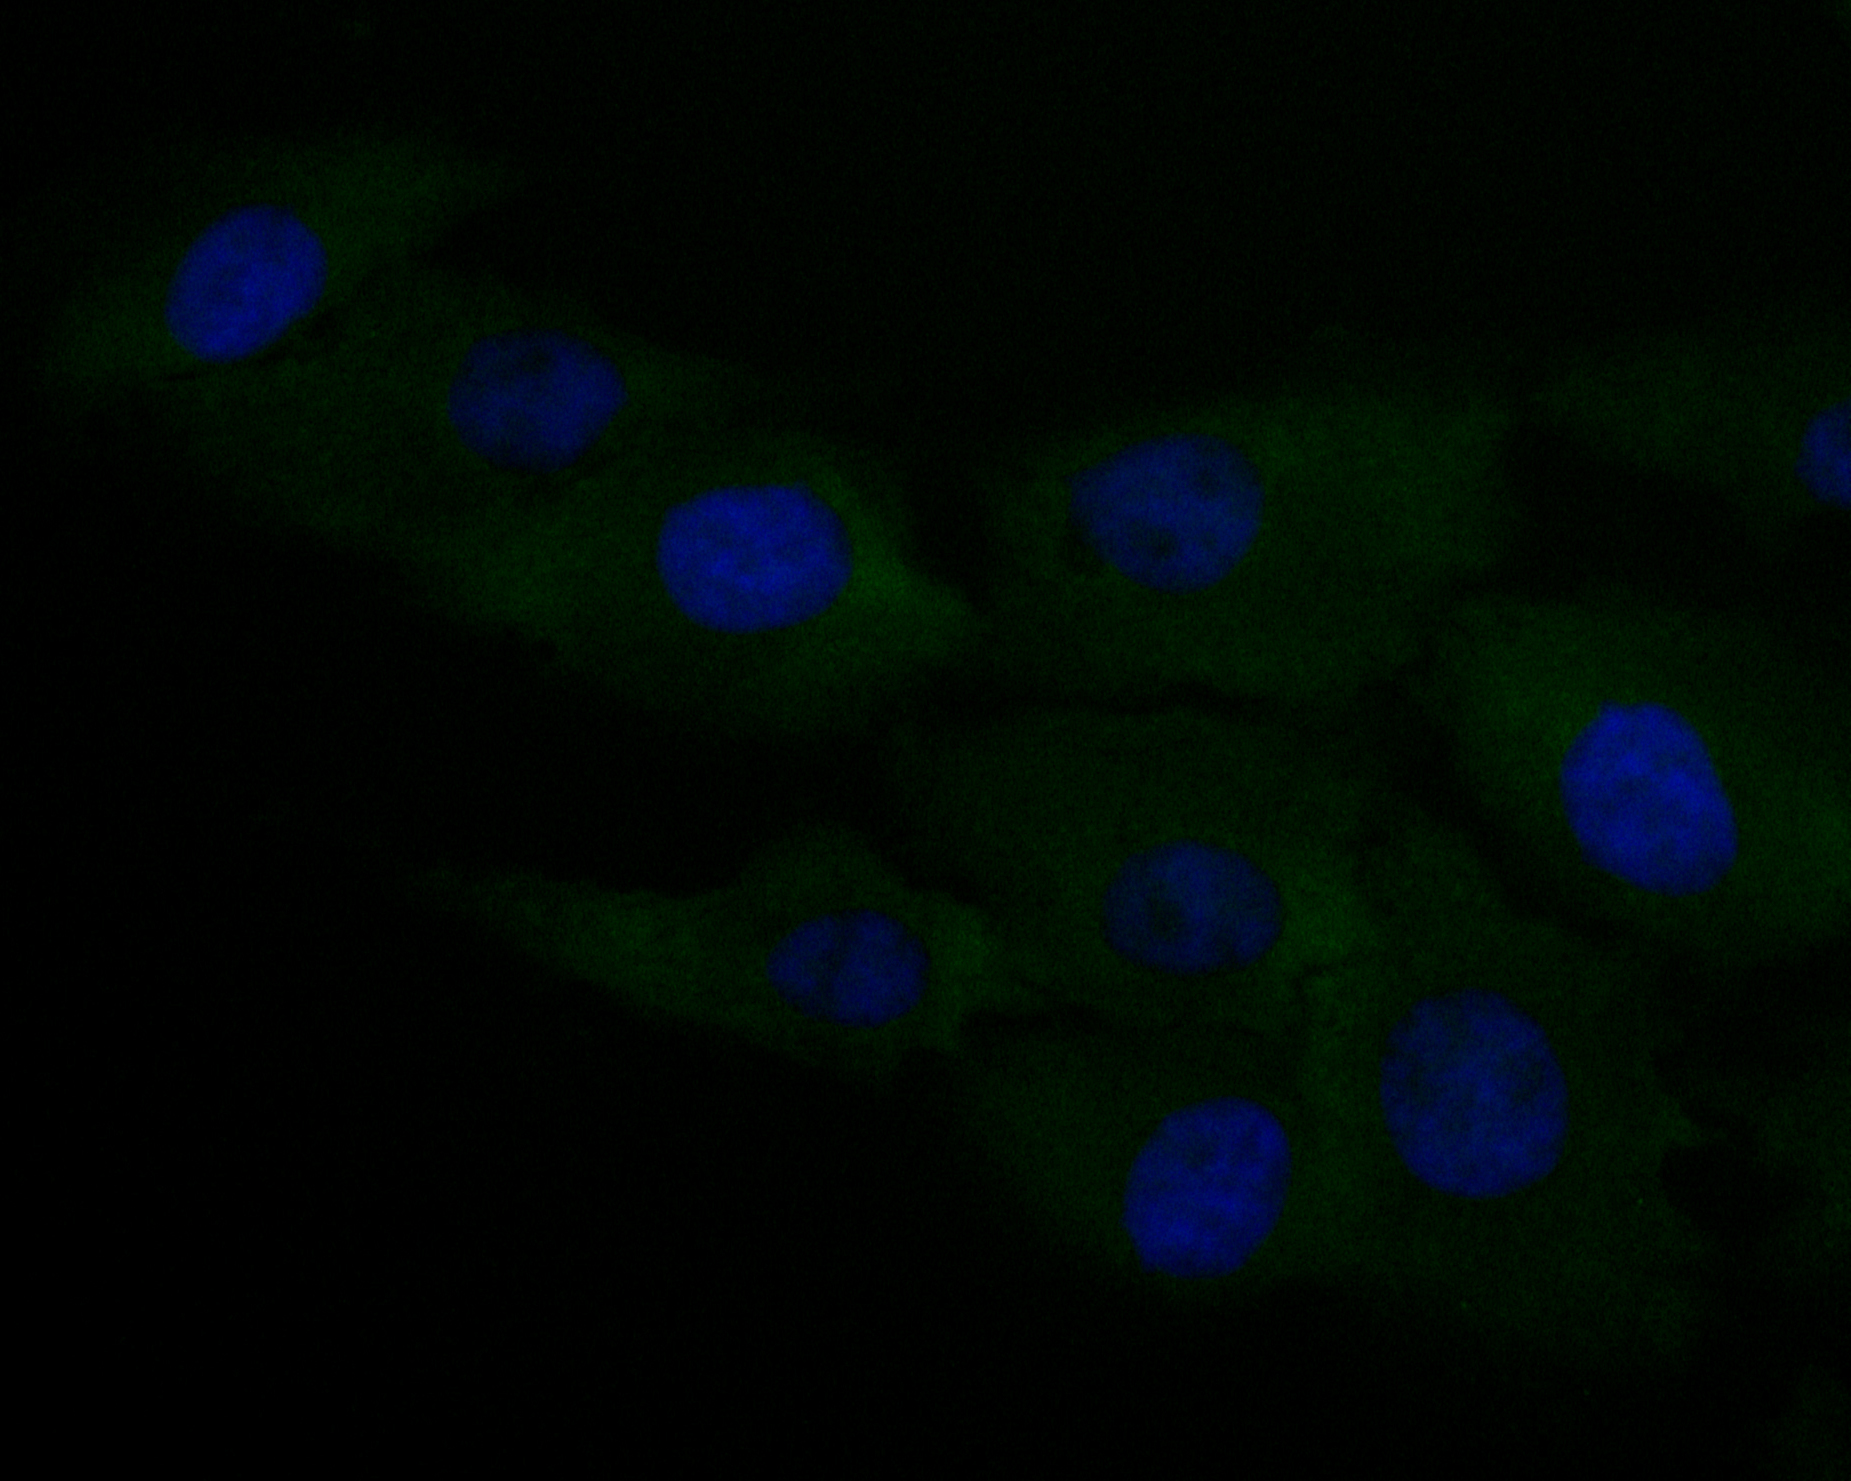 ICC staining of Caspr in MG-63 cells (green). Formalin fixed cells were permeabilized with 0.1% Triton X-100 in TBS for 10 minutes at room temperature and blocked with 1% Blocker BSA for 15 minutes at room temperature. Cells were probed with the primary antibody (EM1902-07, 1/50) for 1 hour at room temperature, washed with PBS. Alexa Fluor®488 Goat anti-Mouse IgG was used as the secondary antibody at 1/1,000 dilution. The nuclear counter stain is DAPI (blue).